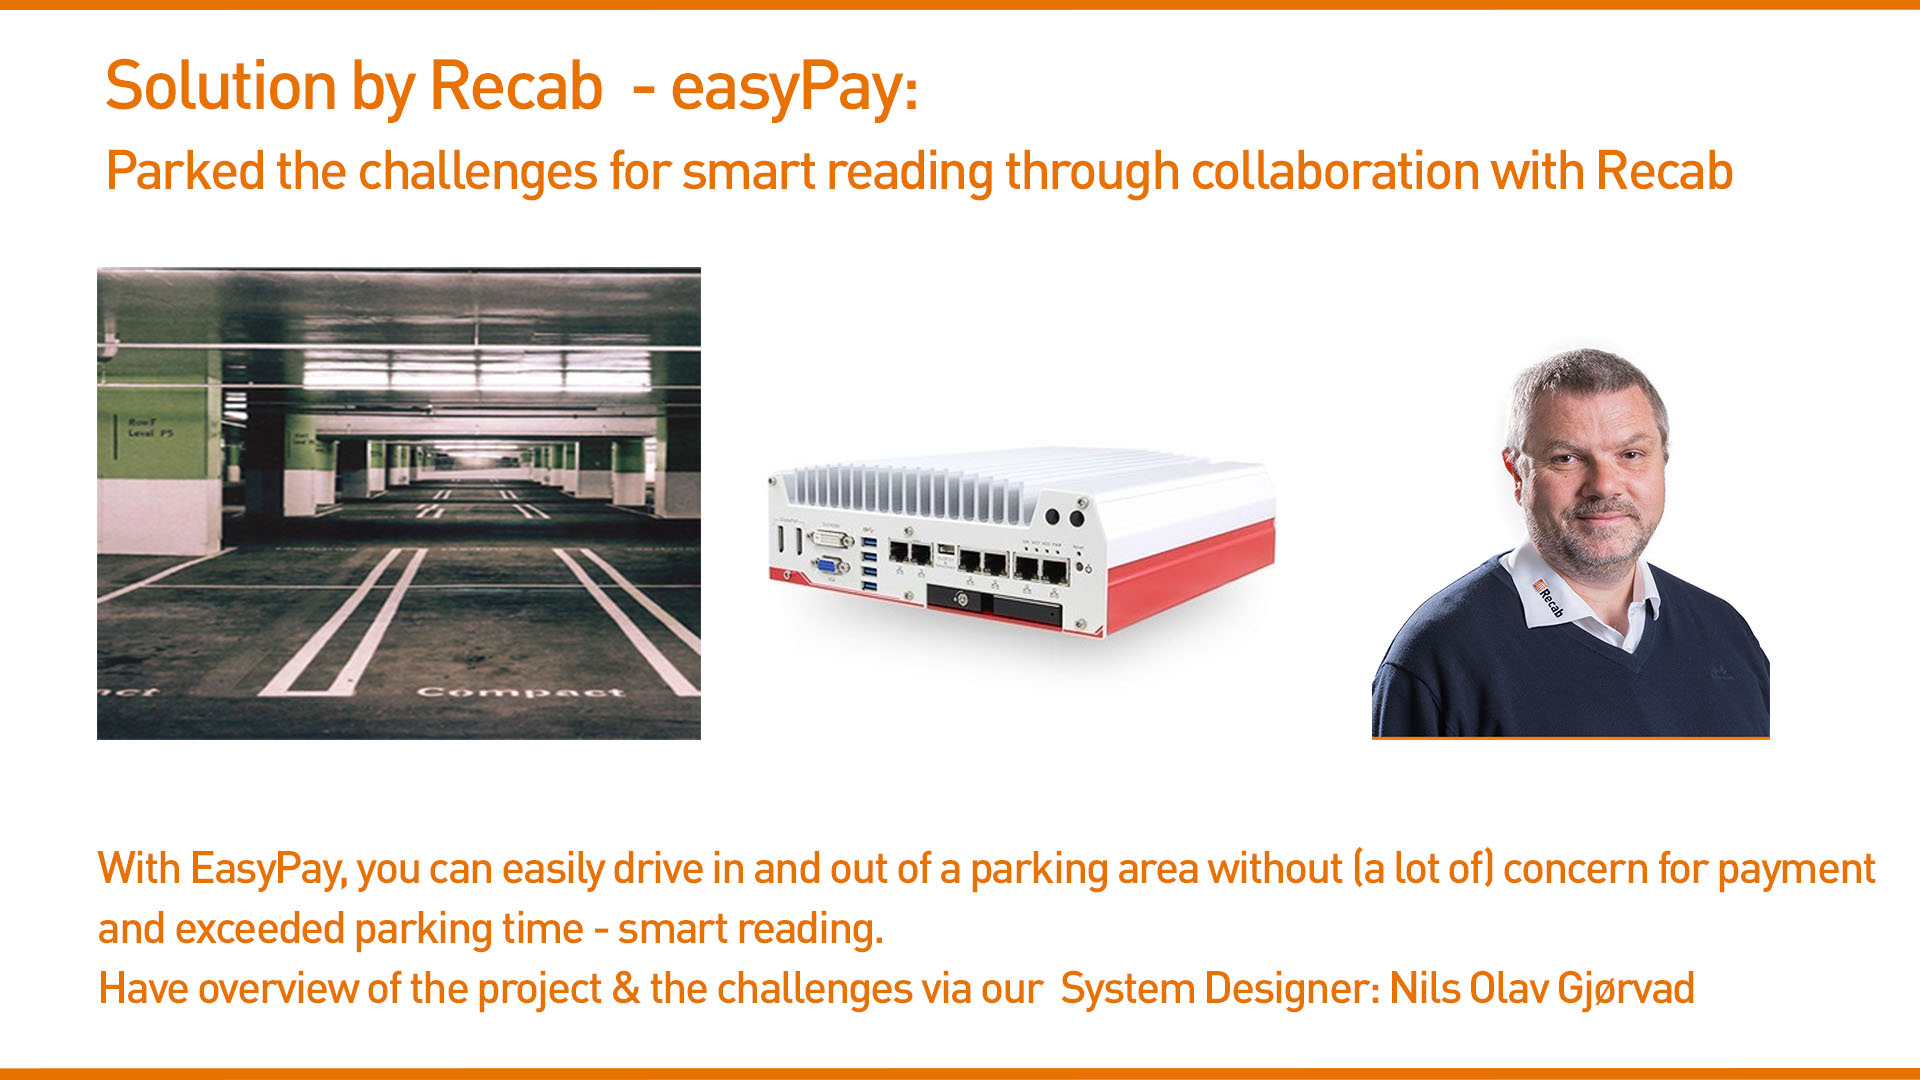 easyPay: Parked the challenges for smart reading through collaboration with Recab